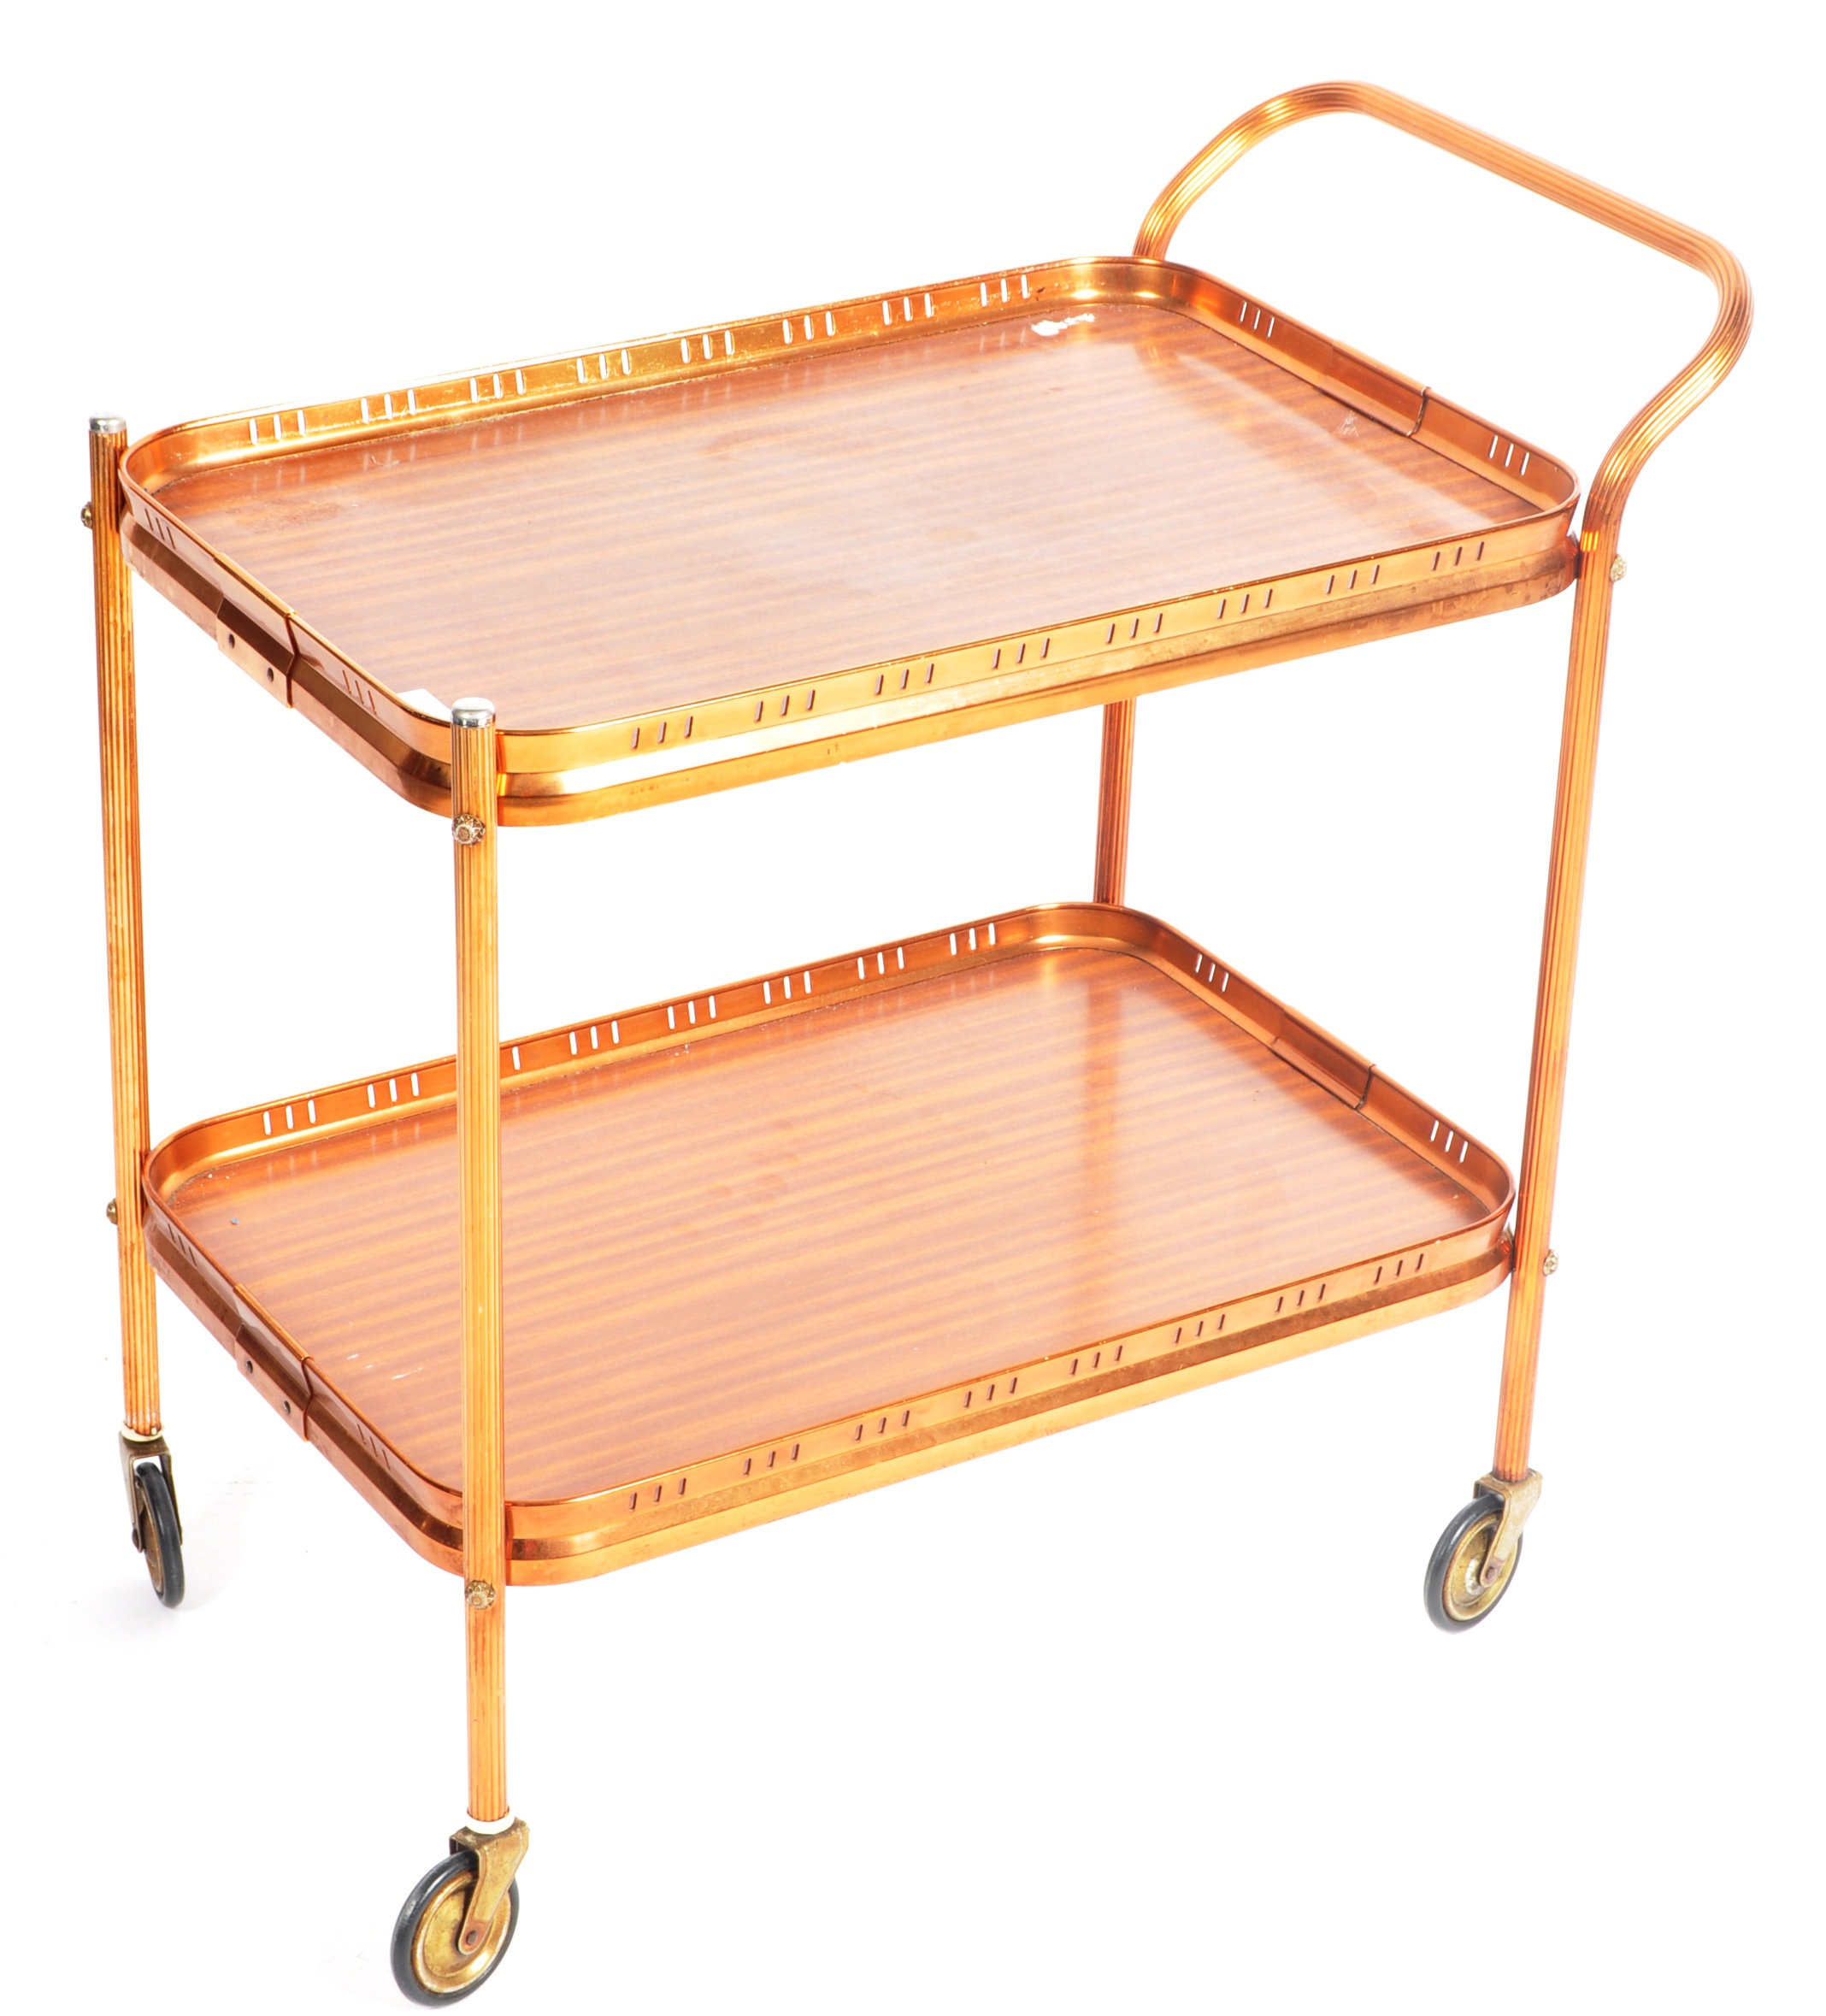 MID CENTURY COPPER TONE METAL TWO TIER DRINKS TROLLEY - Image 2 of 8